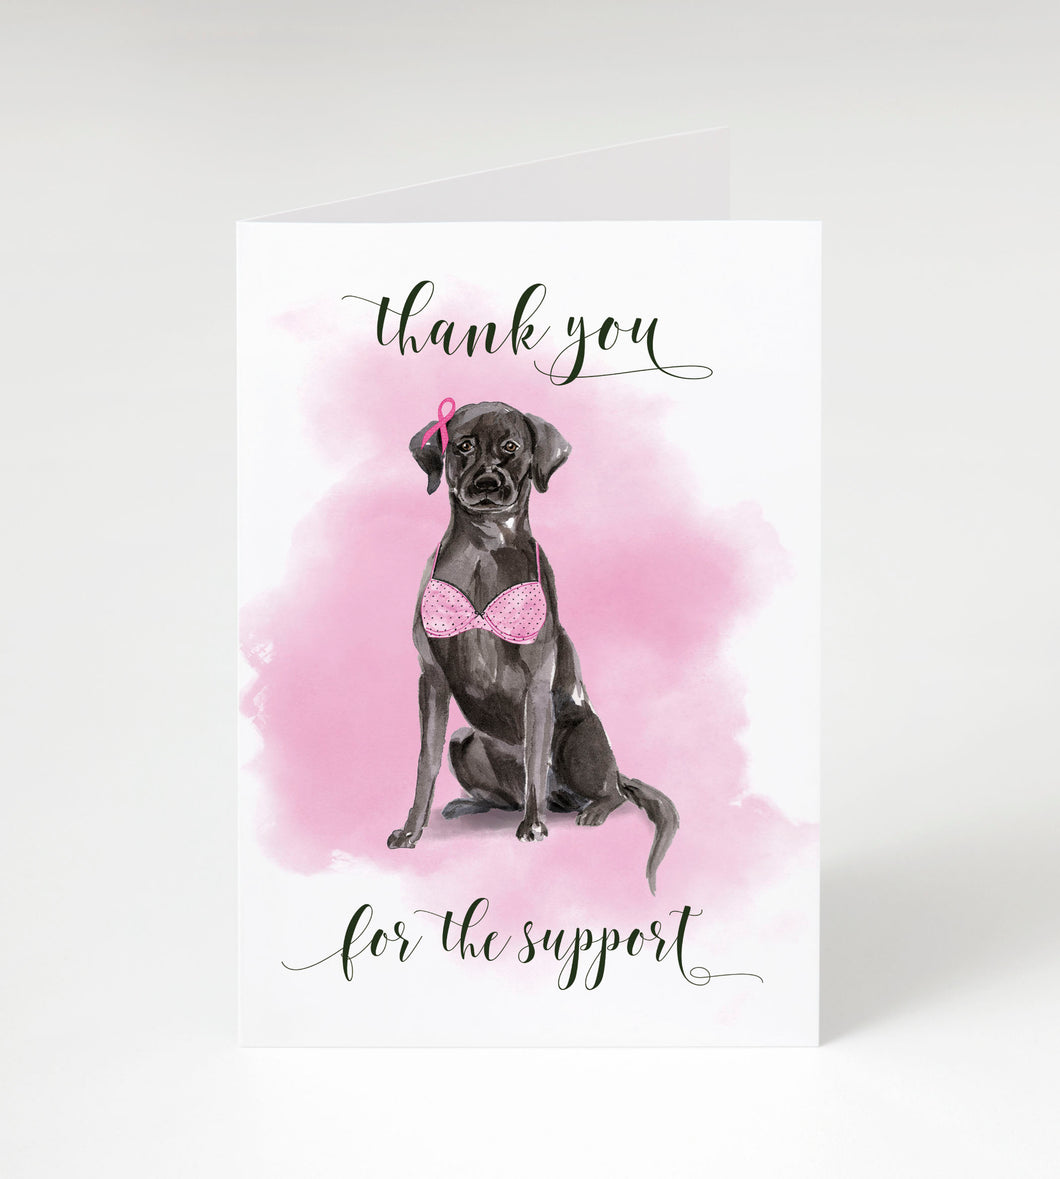 Furry Friend - Breast Cancer Support Thank You Cards w/ White Envelopes (25 Count)